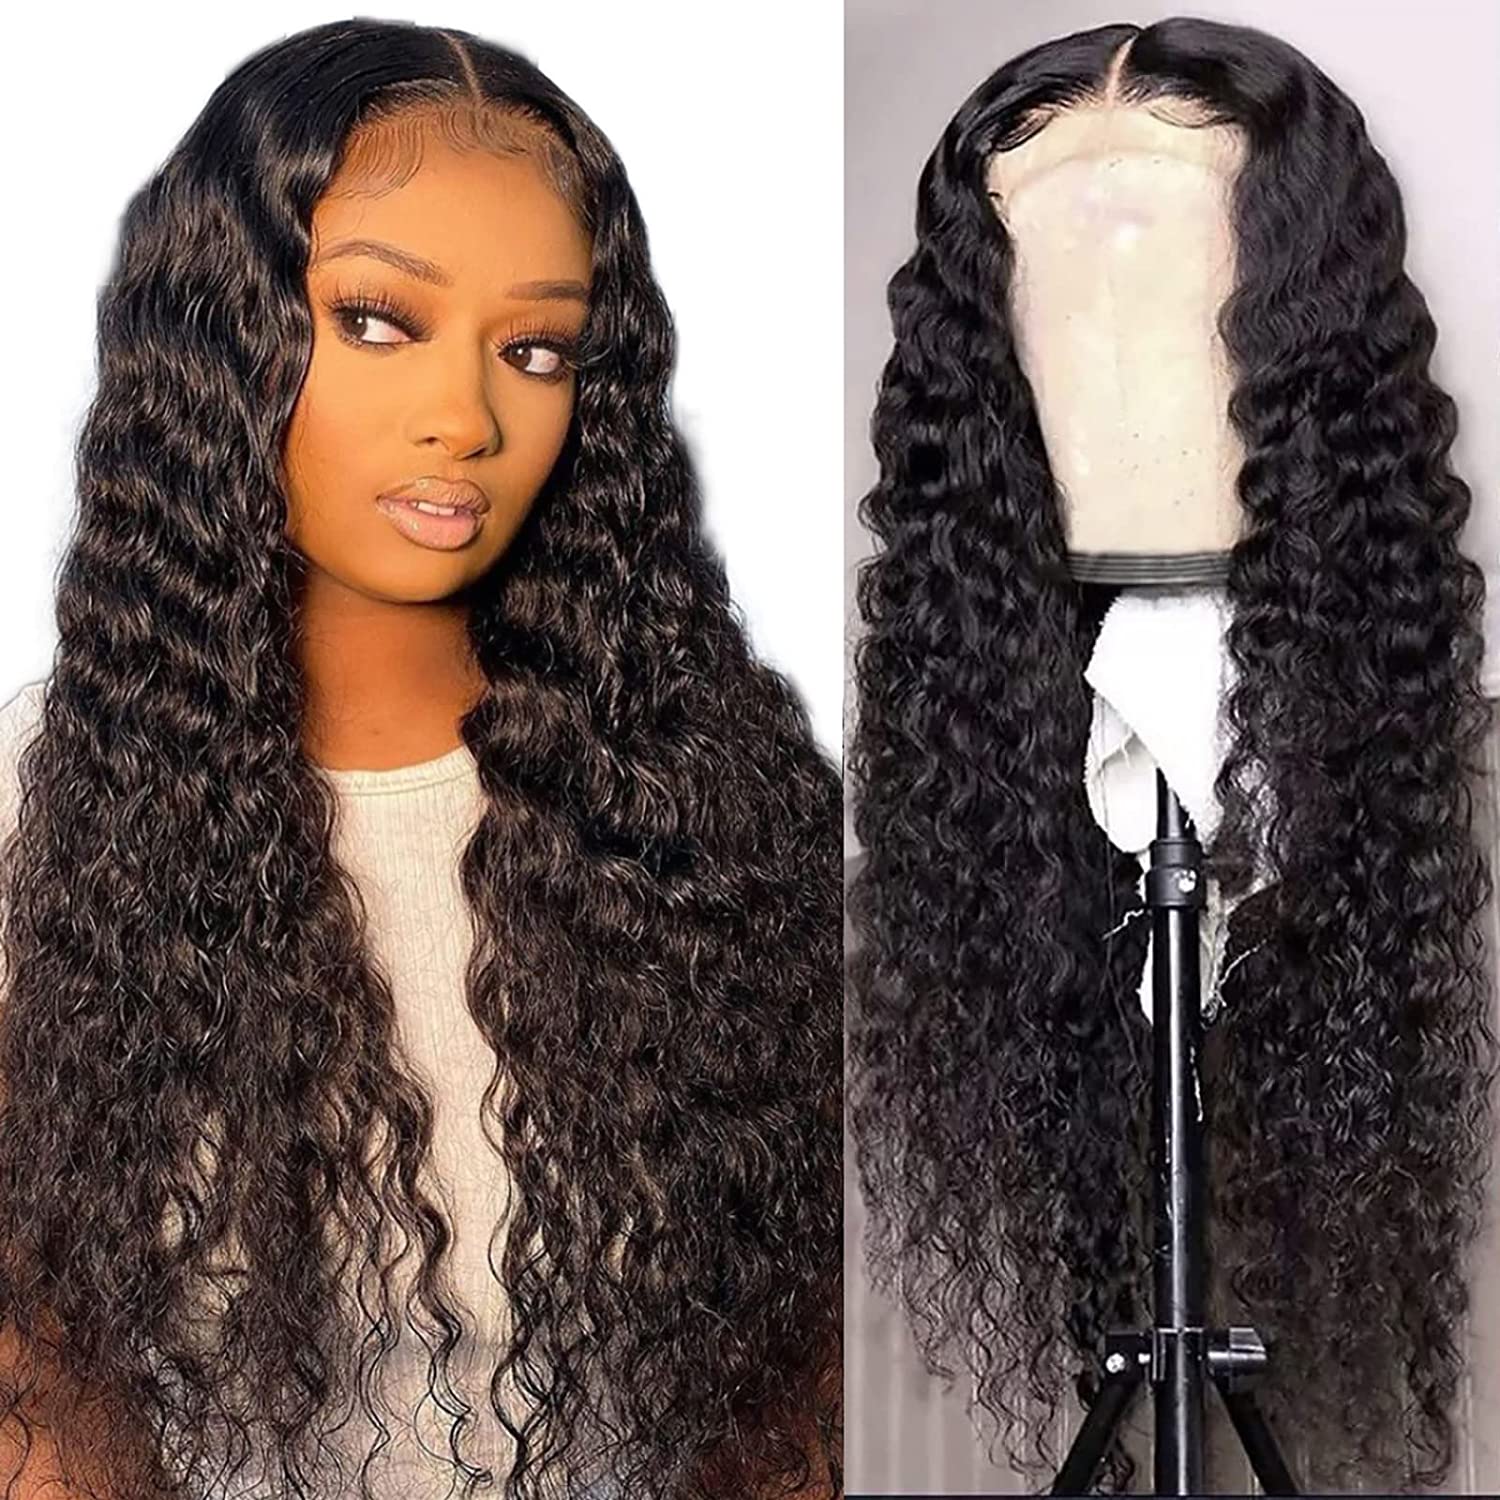 Let’s get chic with the deep wave wig